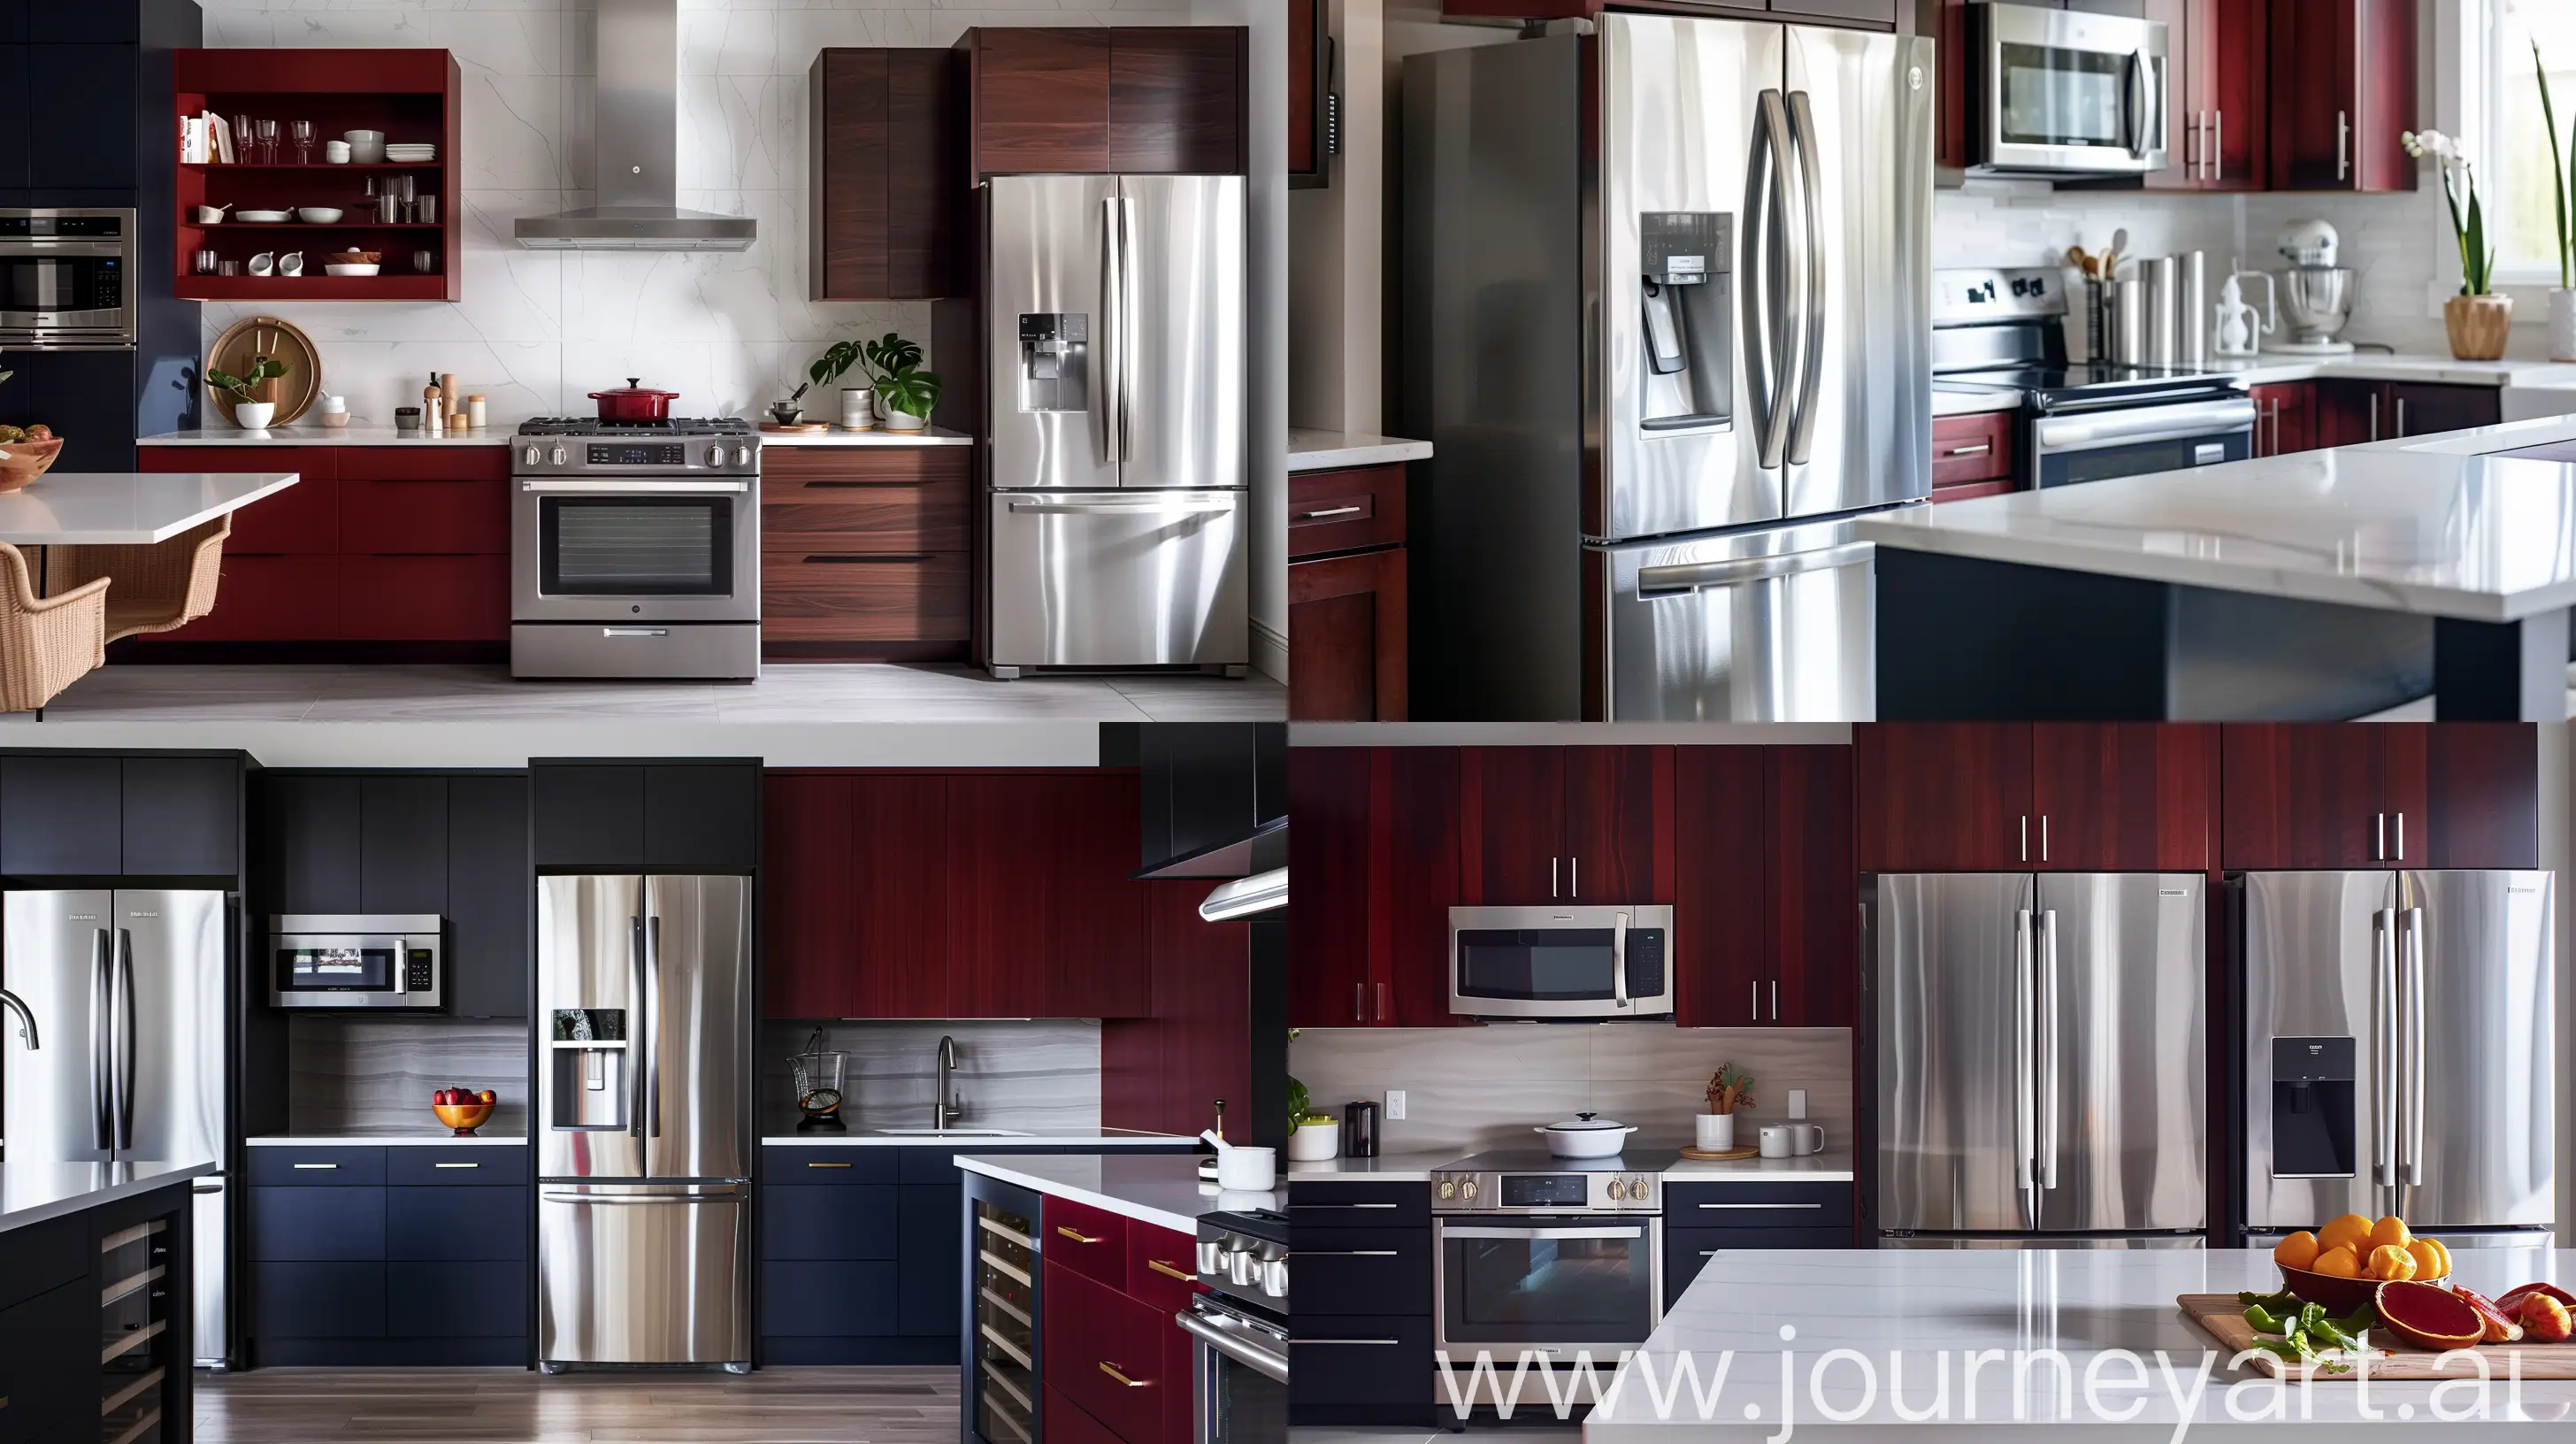 Experience the modern elegance of a gourmet kitchen, with clean lines and minimalist design. Picture sleek stainless steel appliances contrasting against rich, dark wood cabinets. The color scheme blends shades of crisp white, deep navy, and touches of vibrant red. --ar 16:9